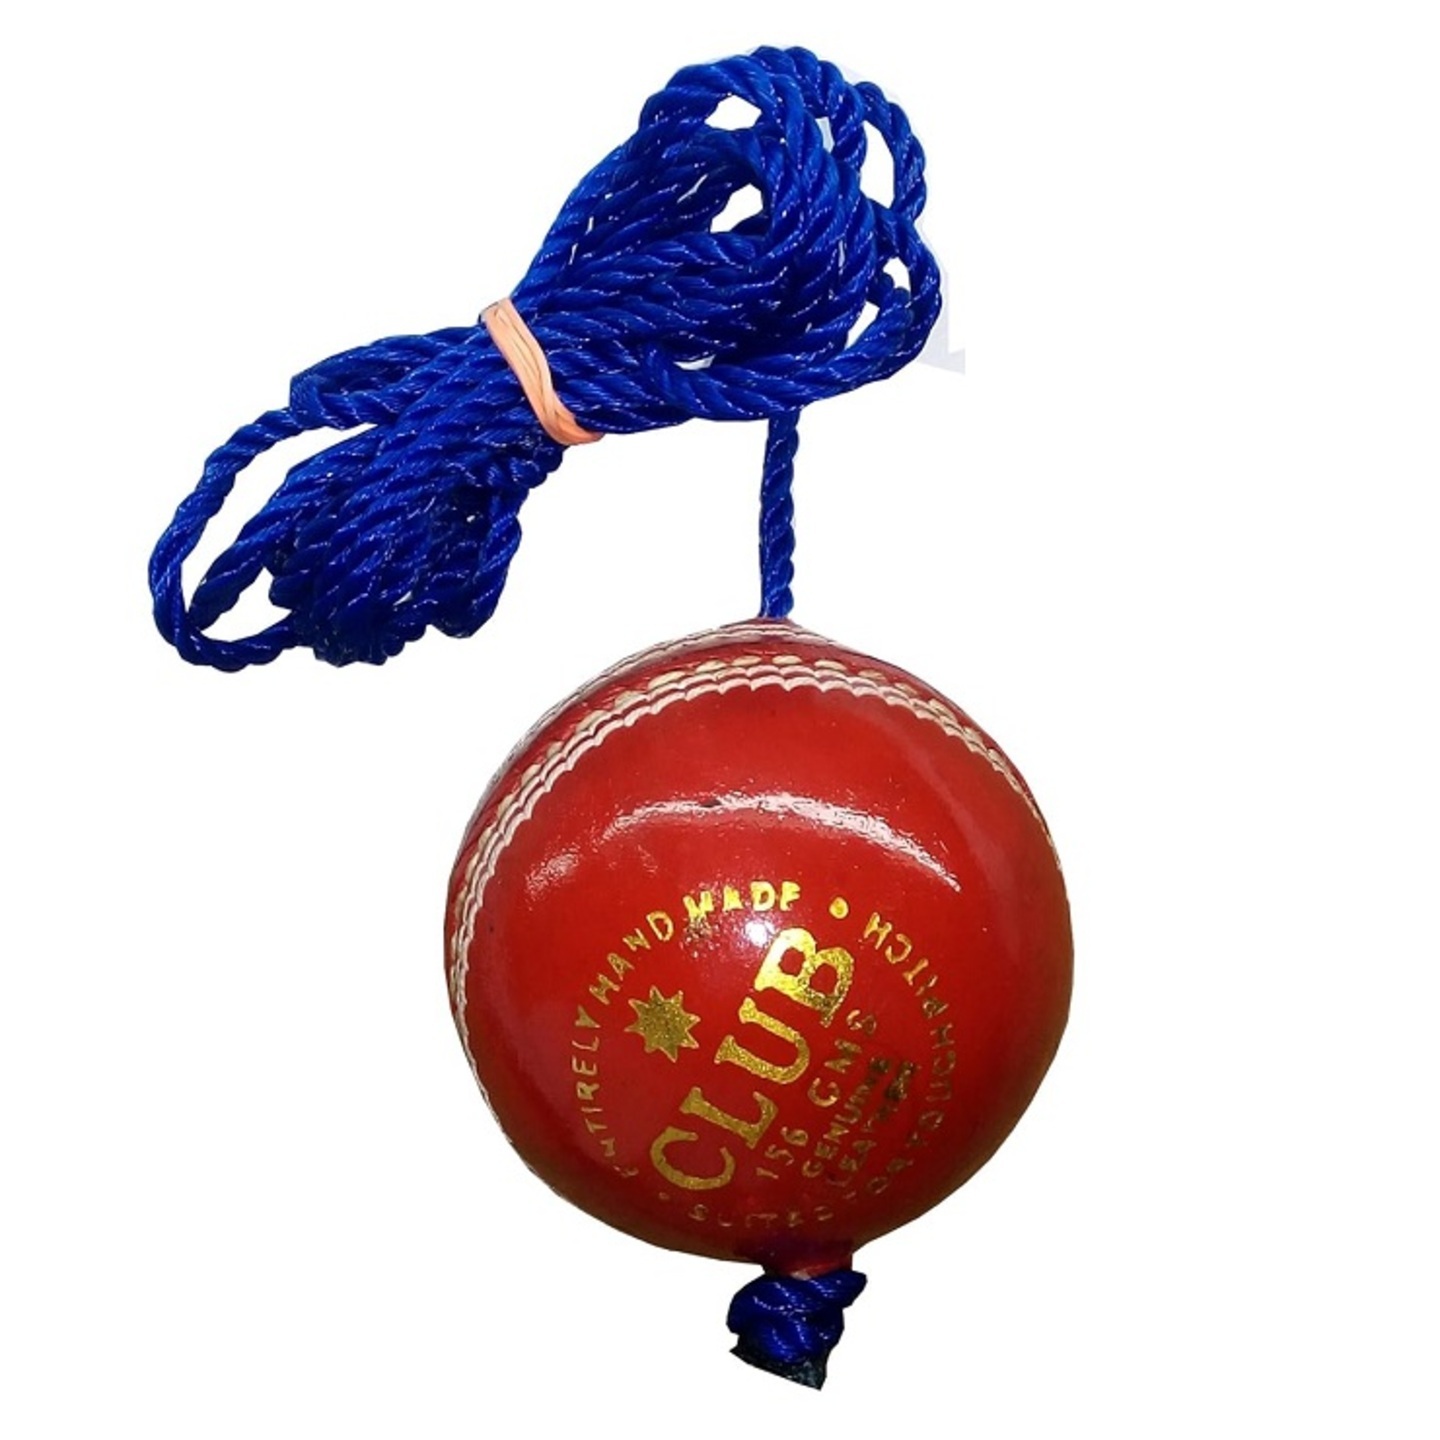 Dynex Genuine Leather Hanging Cricket Ball for Shot Practice Single  Pack of 6